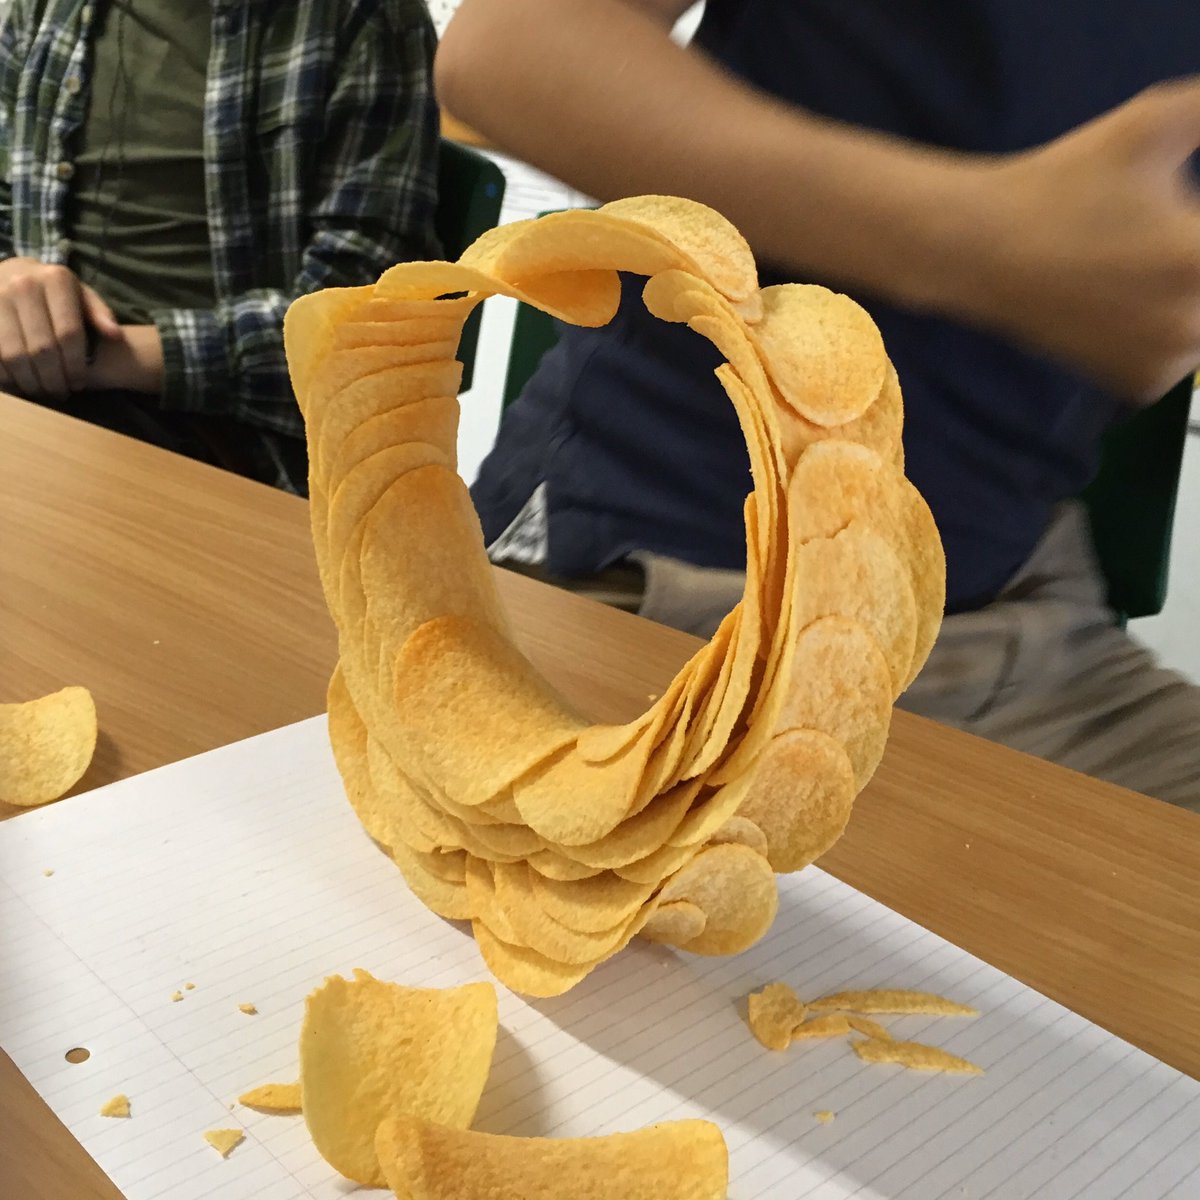 2) Something yummy next: a self-supporting, hyperbolic paraboloid  @Pringles ring More info here:  https://interestingengineering.com/geometry-of-pringles-crunchy-hyperbolic-paraboloidOr use Erik Demaine’s instructions to fold paper versions:  http://erikdemaine.org/hypar/  #3DMaths  #HandsOnMaths  #LockdownMaths  #ArtfulMaths